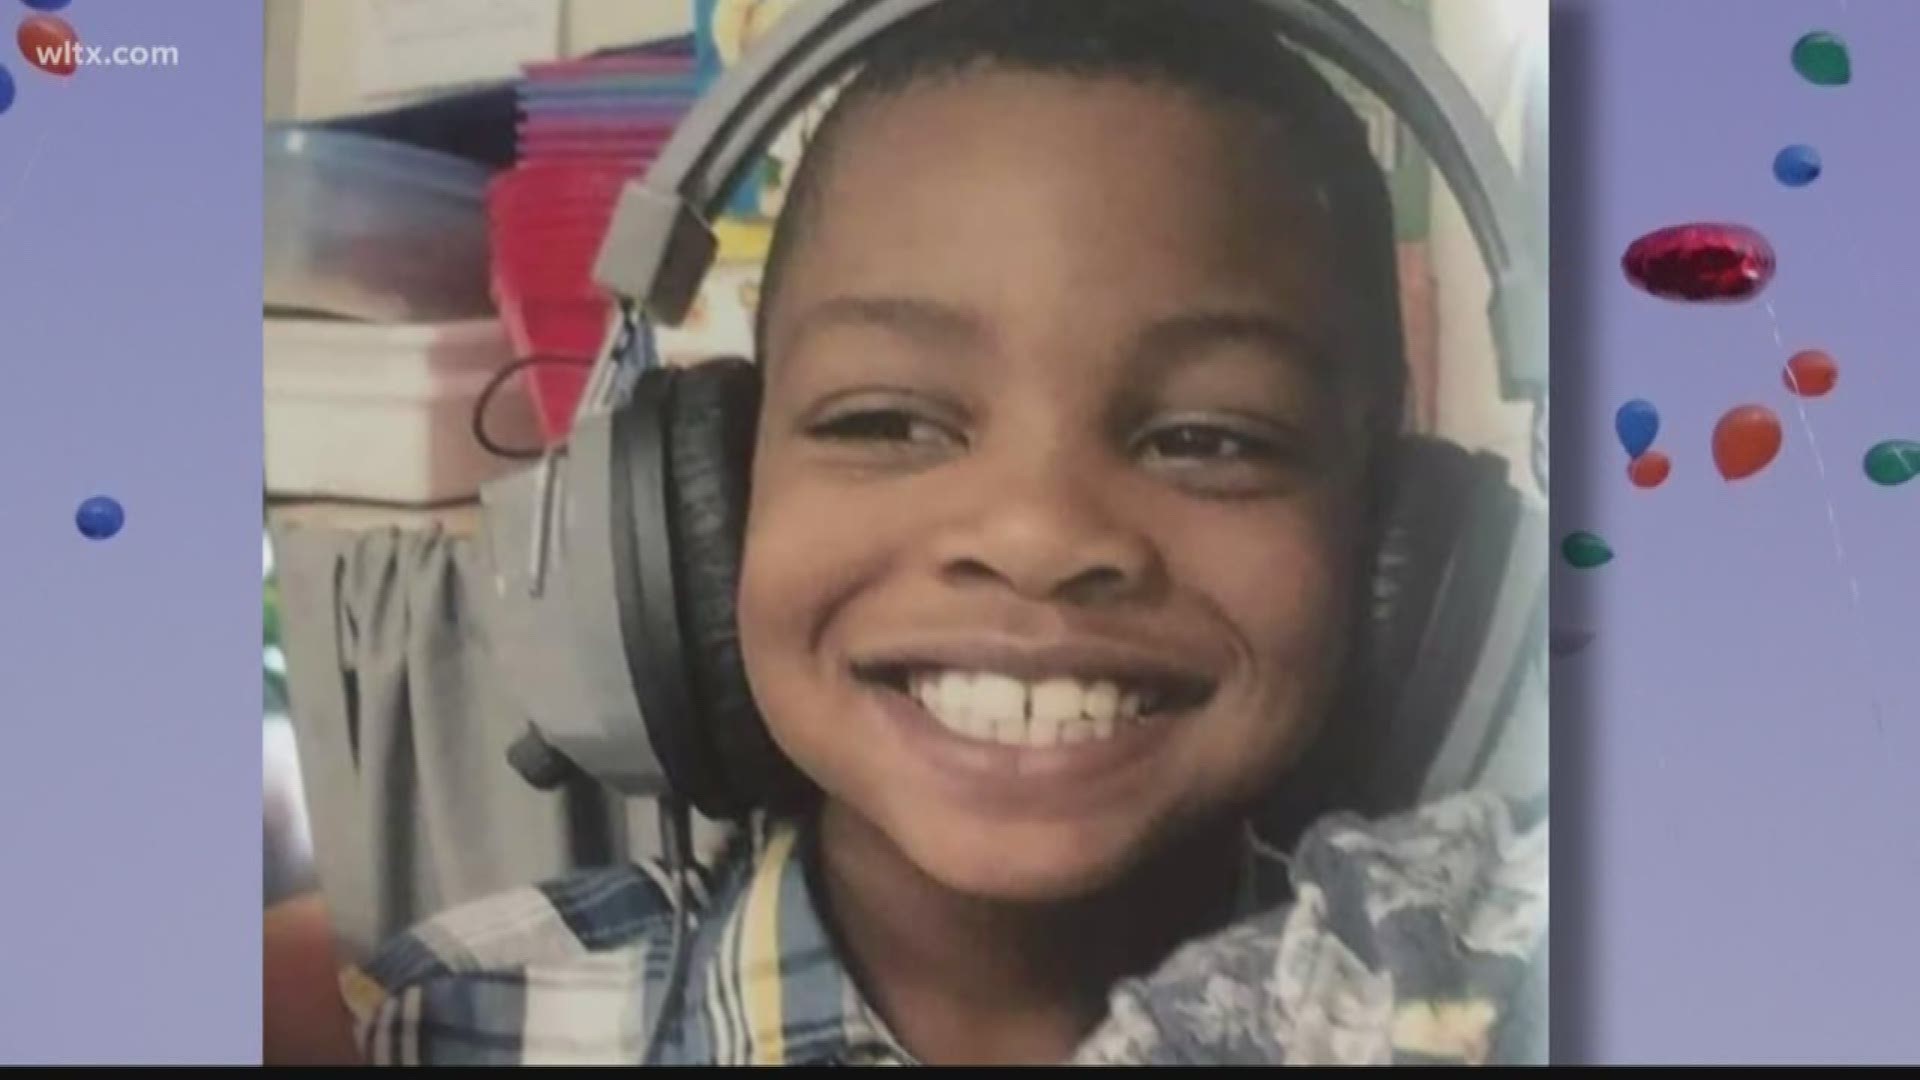 In Newberry county, a family is grieving after the shooting death of Iven Penny, 7.